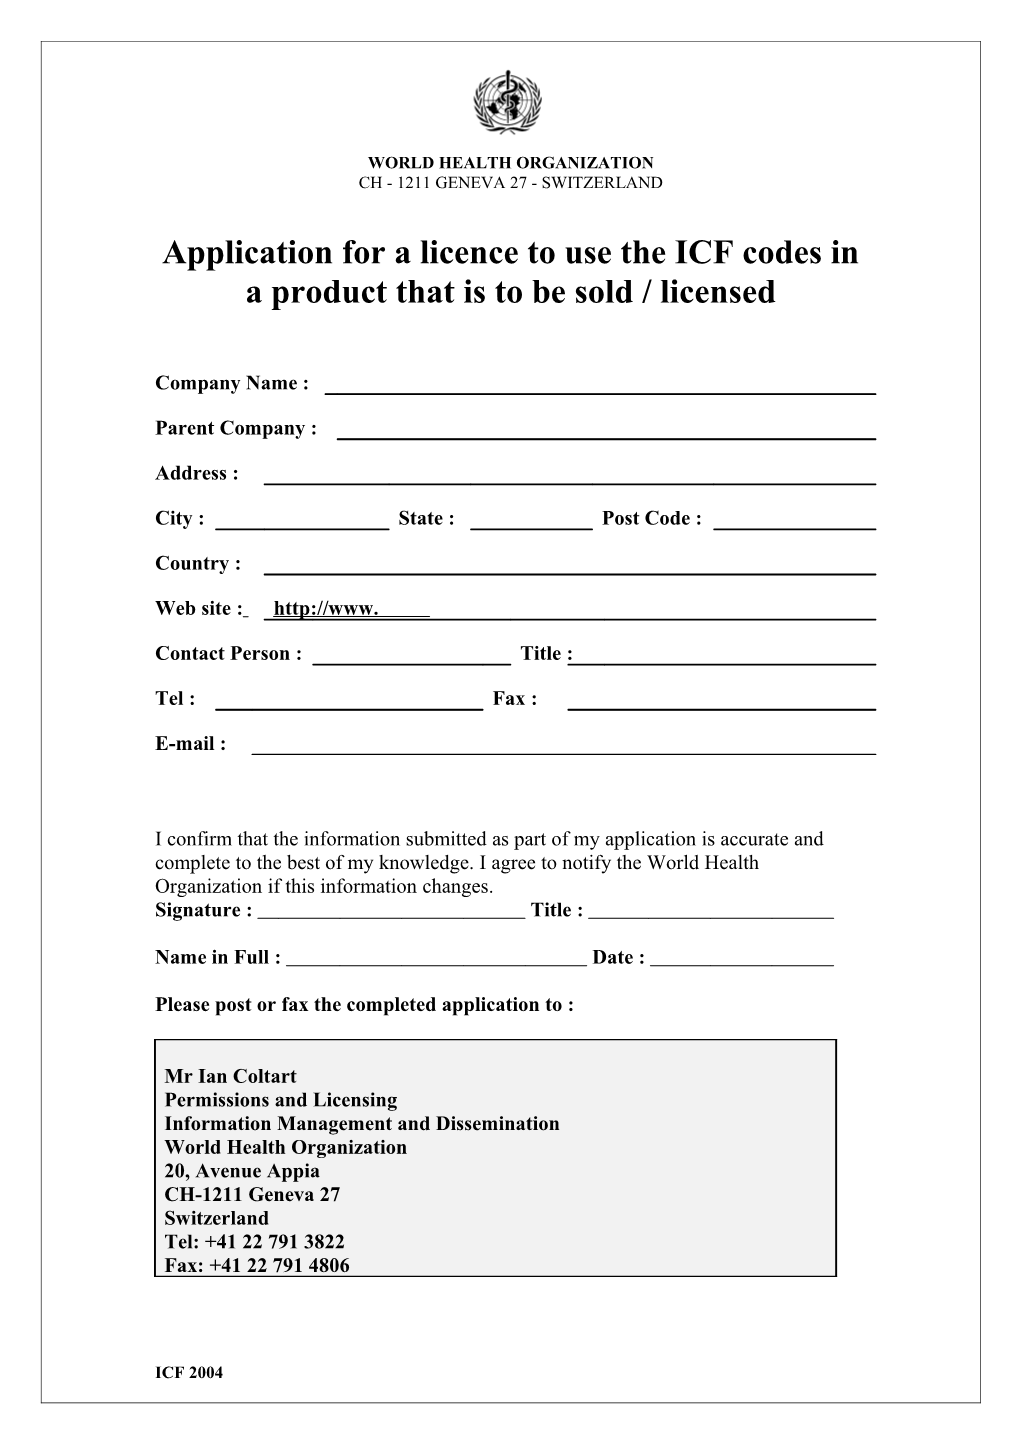 Application for a Licence to Distribute ICD-10 Codes